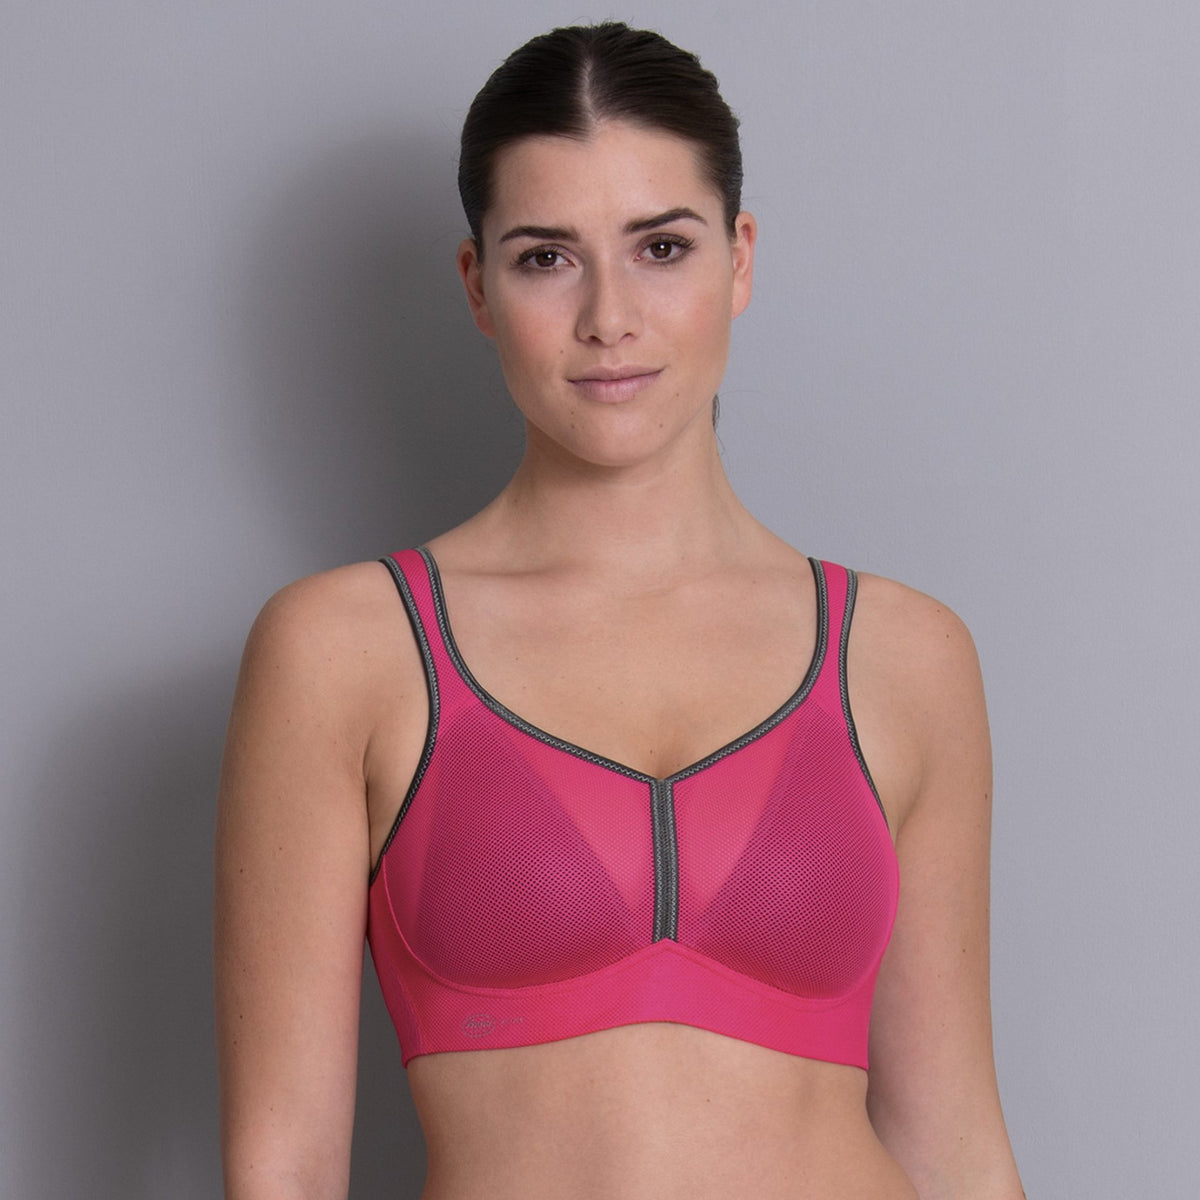 ANITA AIR CONTROL SPORTS BRA WITH PADDED CUPS - PINK/ANTHRACITE